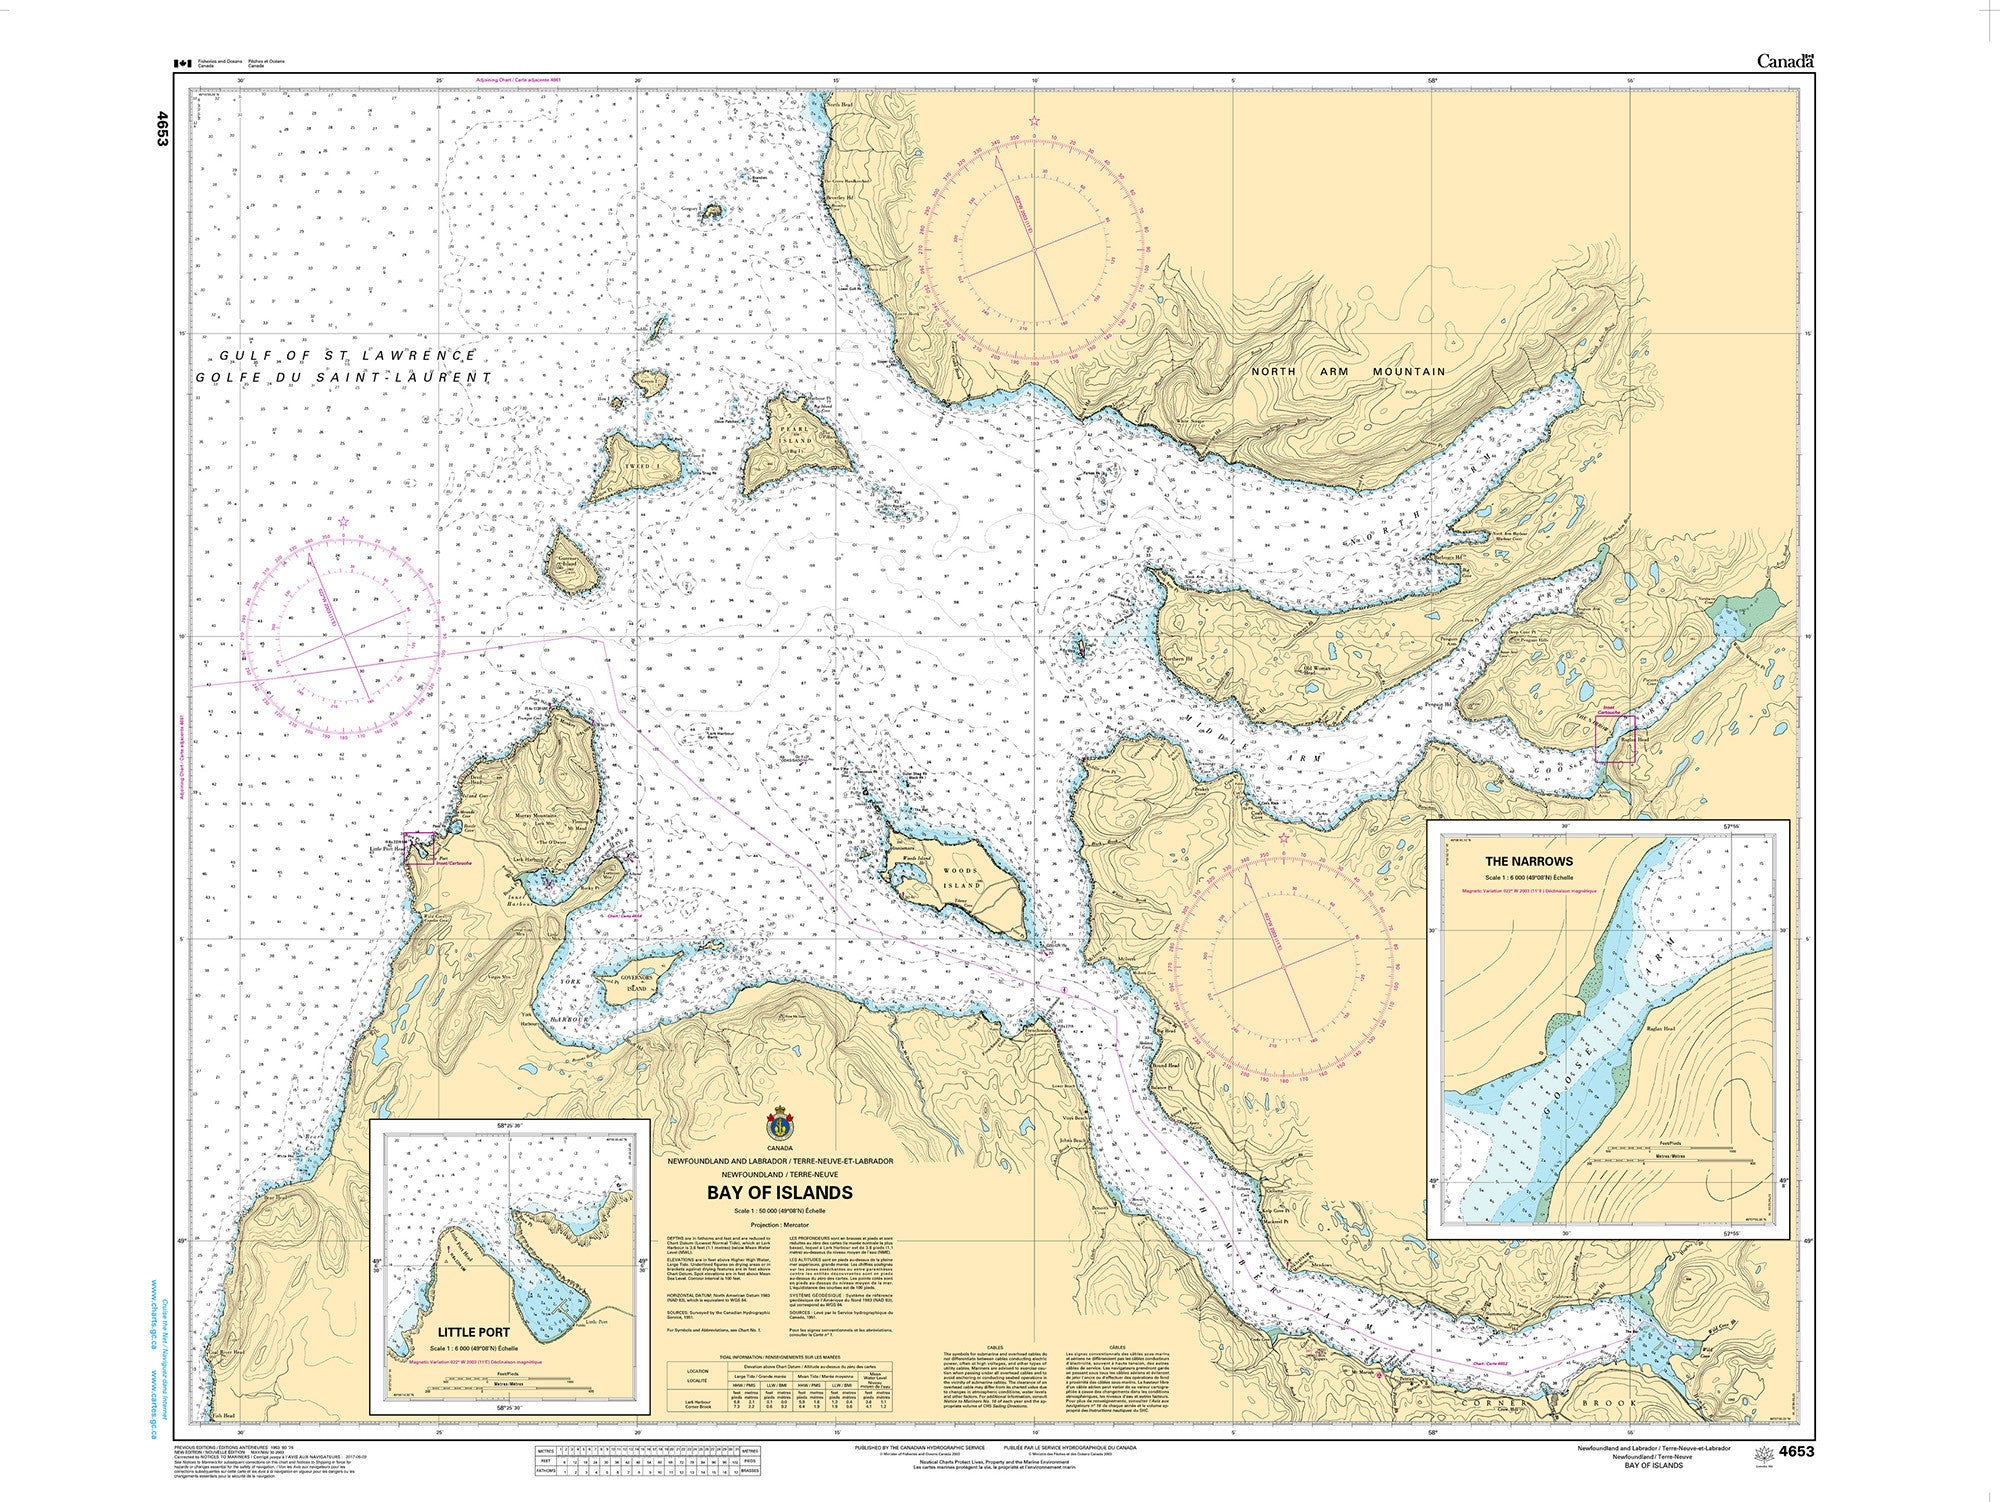 Canadian Hydrographic Service Nautical Chart CHS4653: Bay of Islands